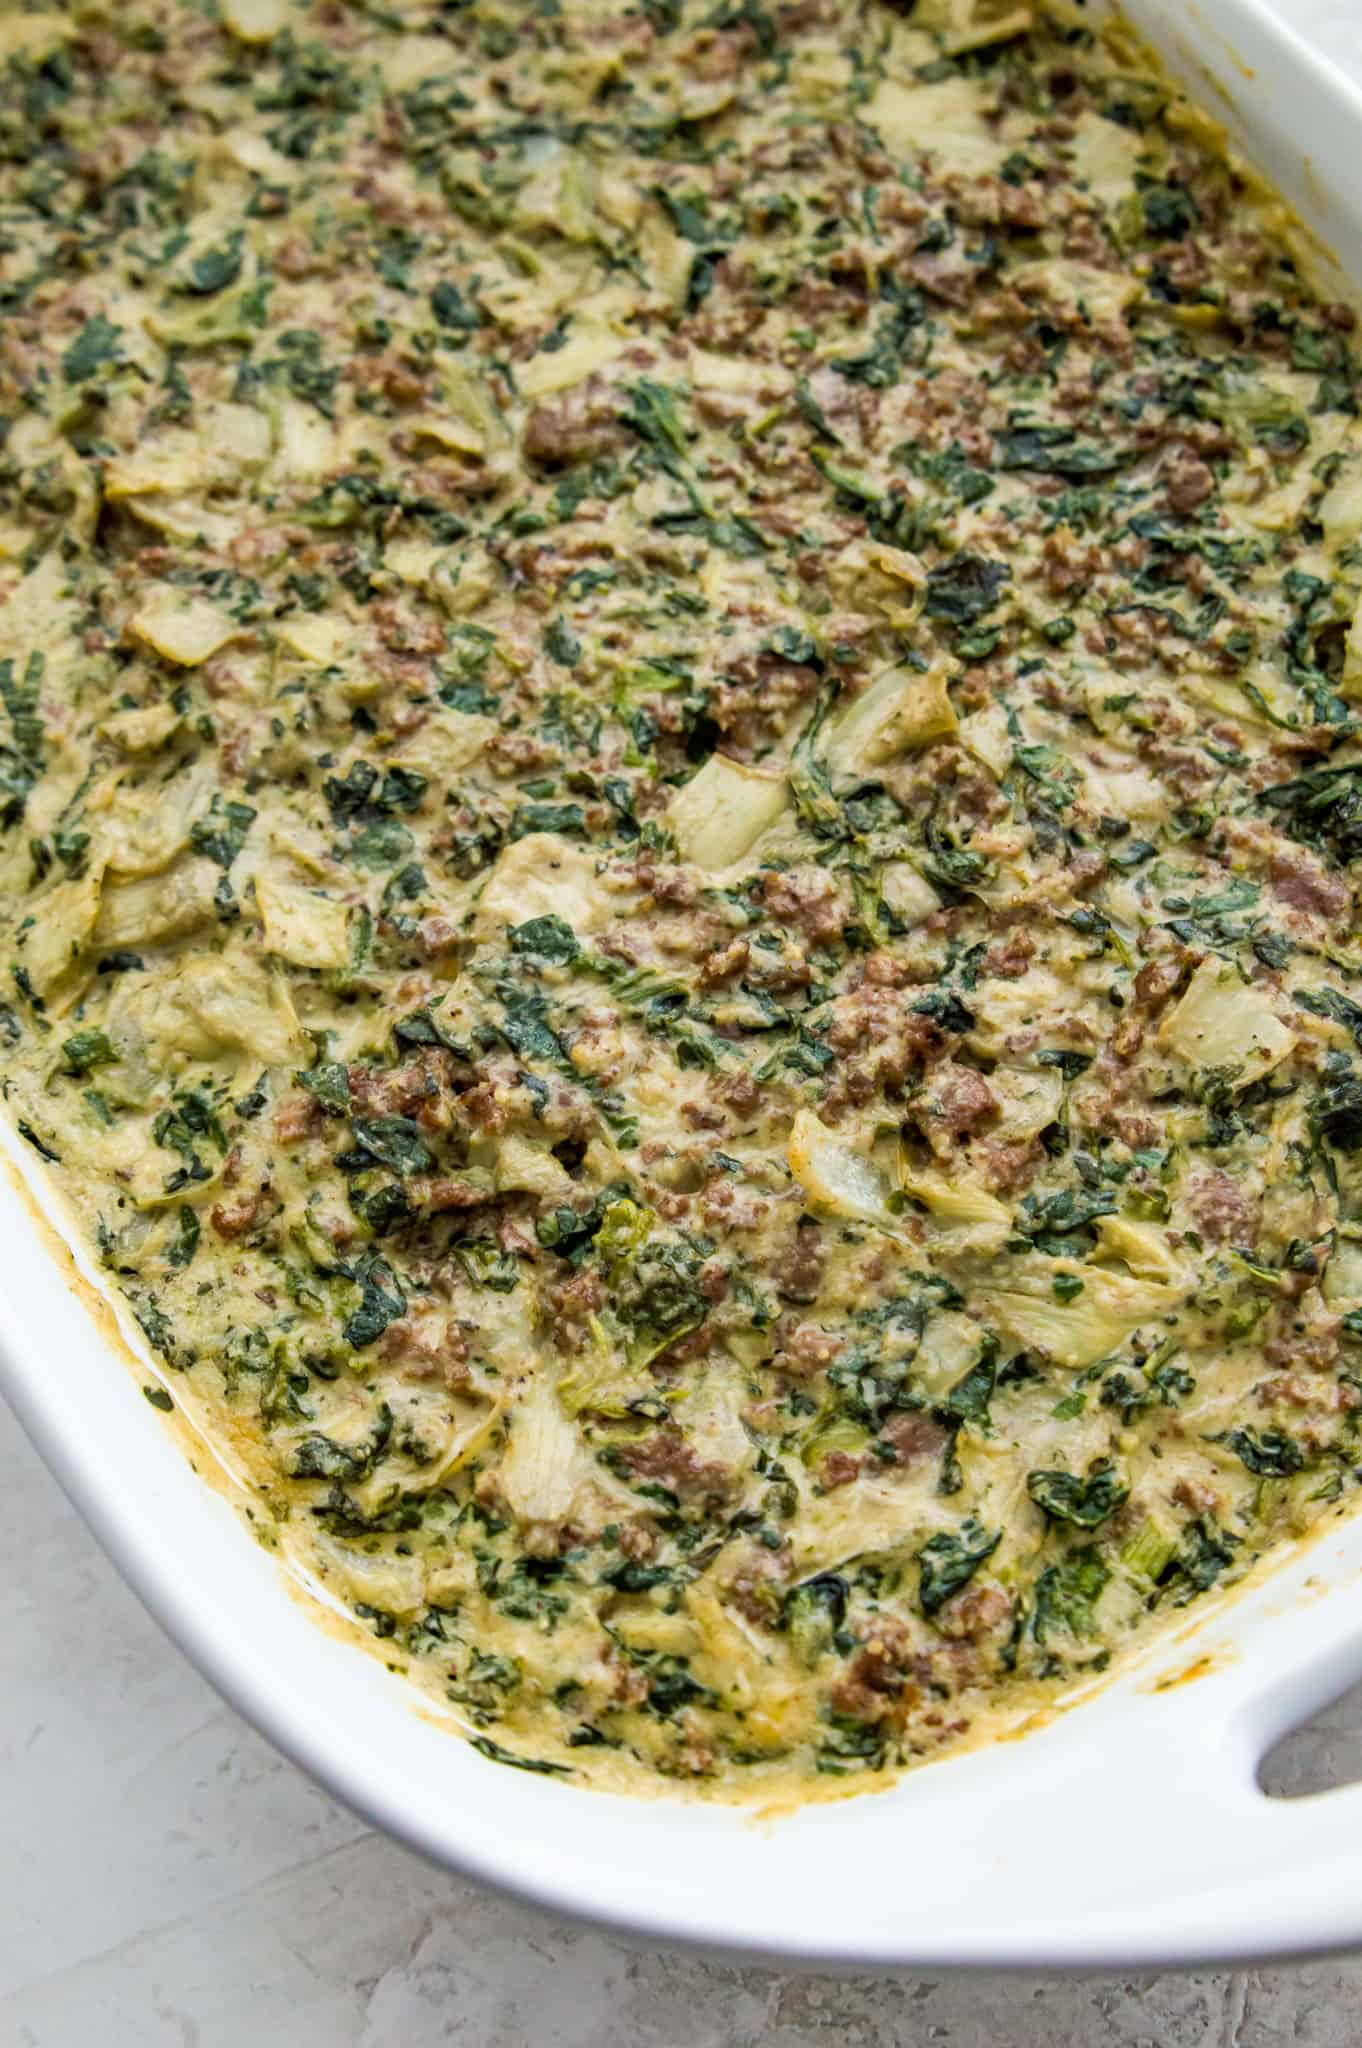 A casserole dish filled with a cooked spinach and artichoke casserole.